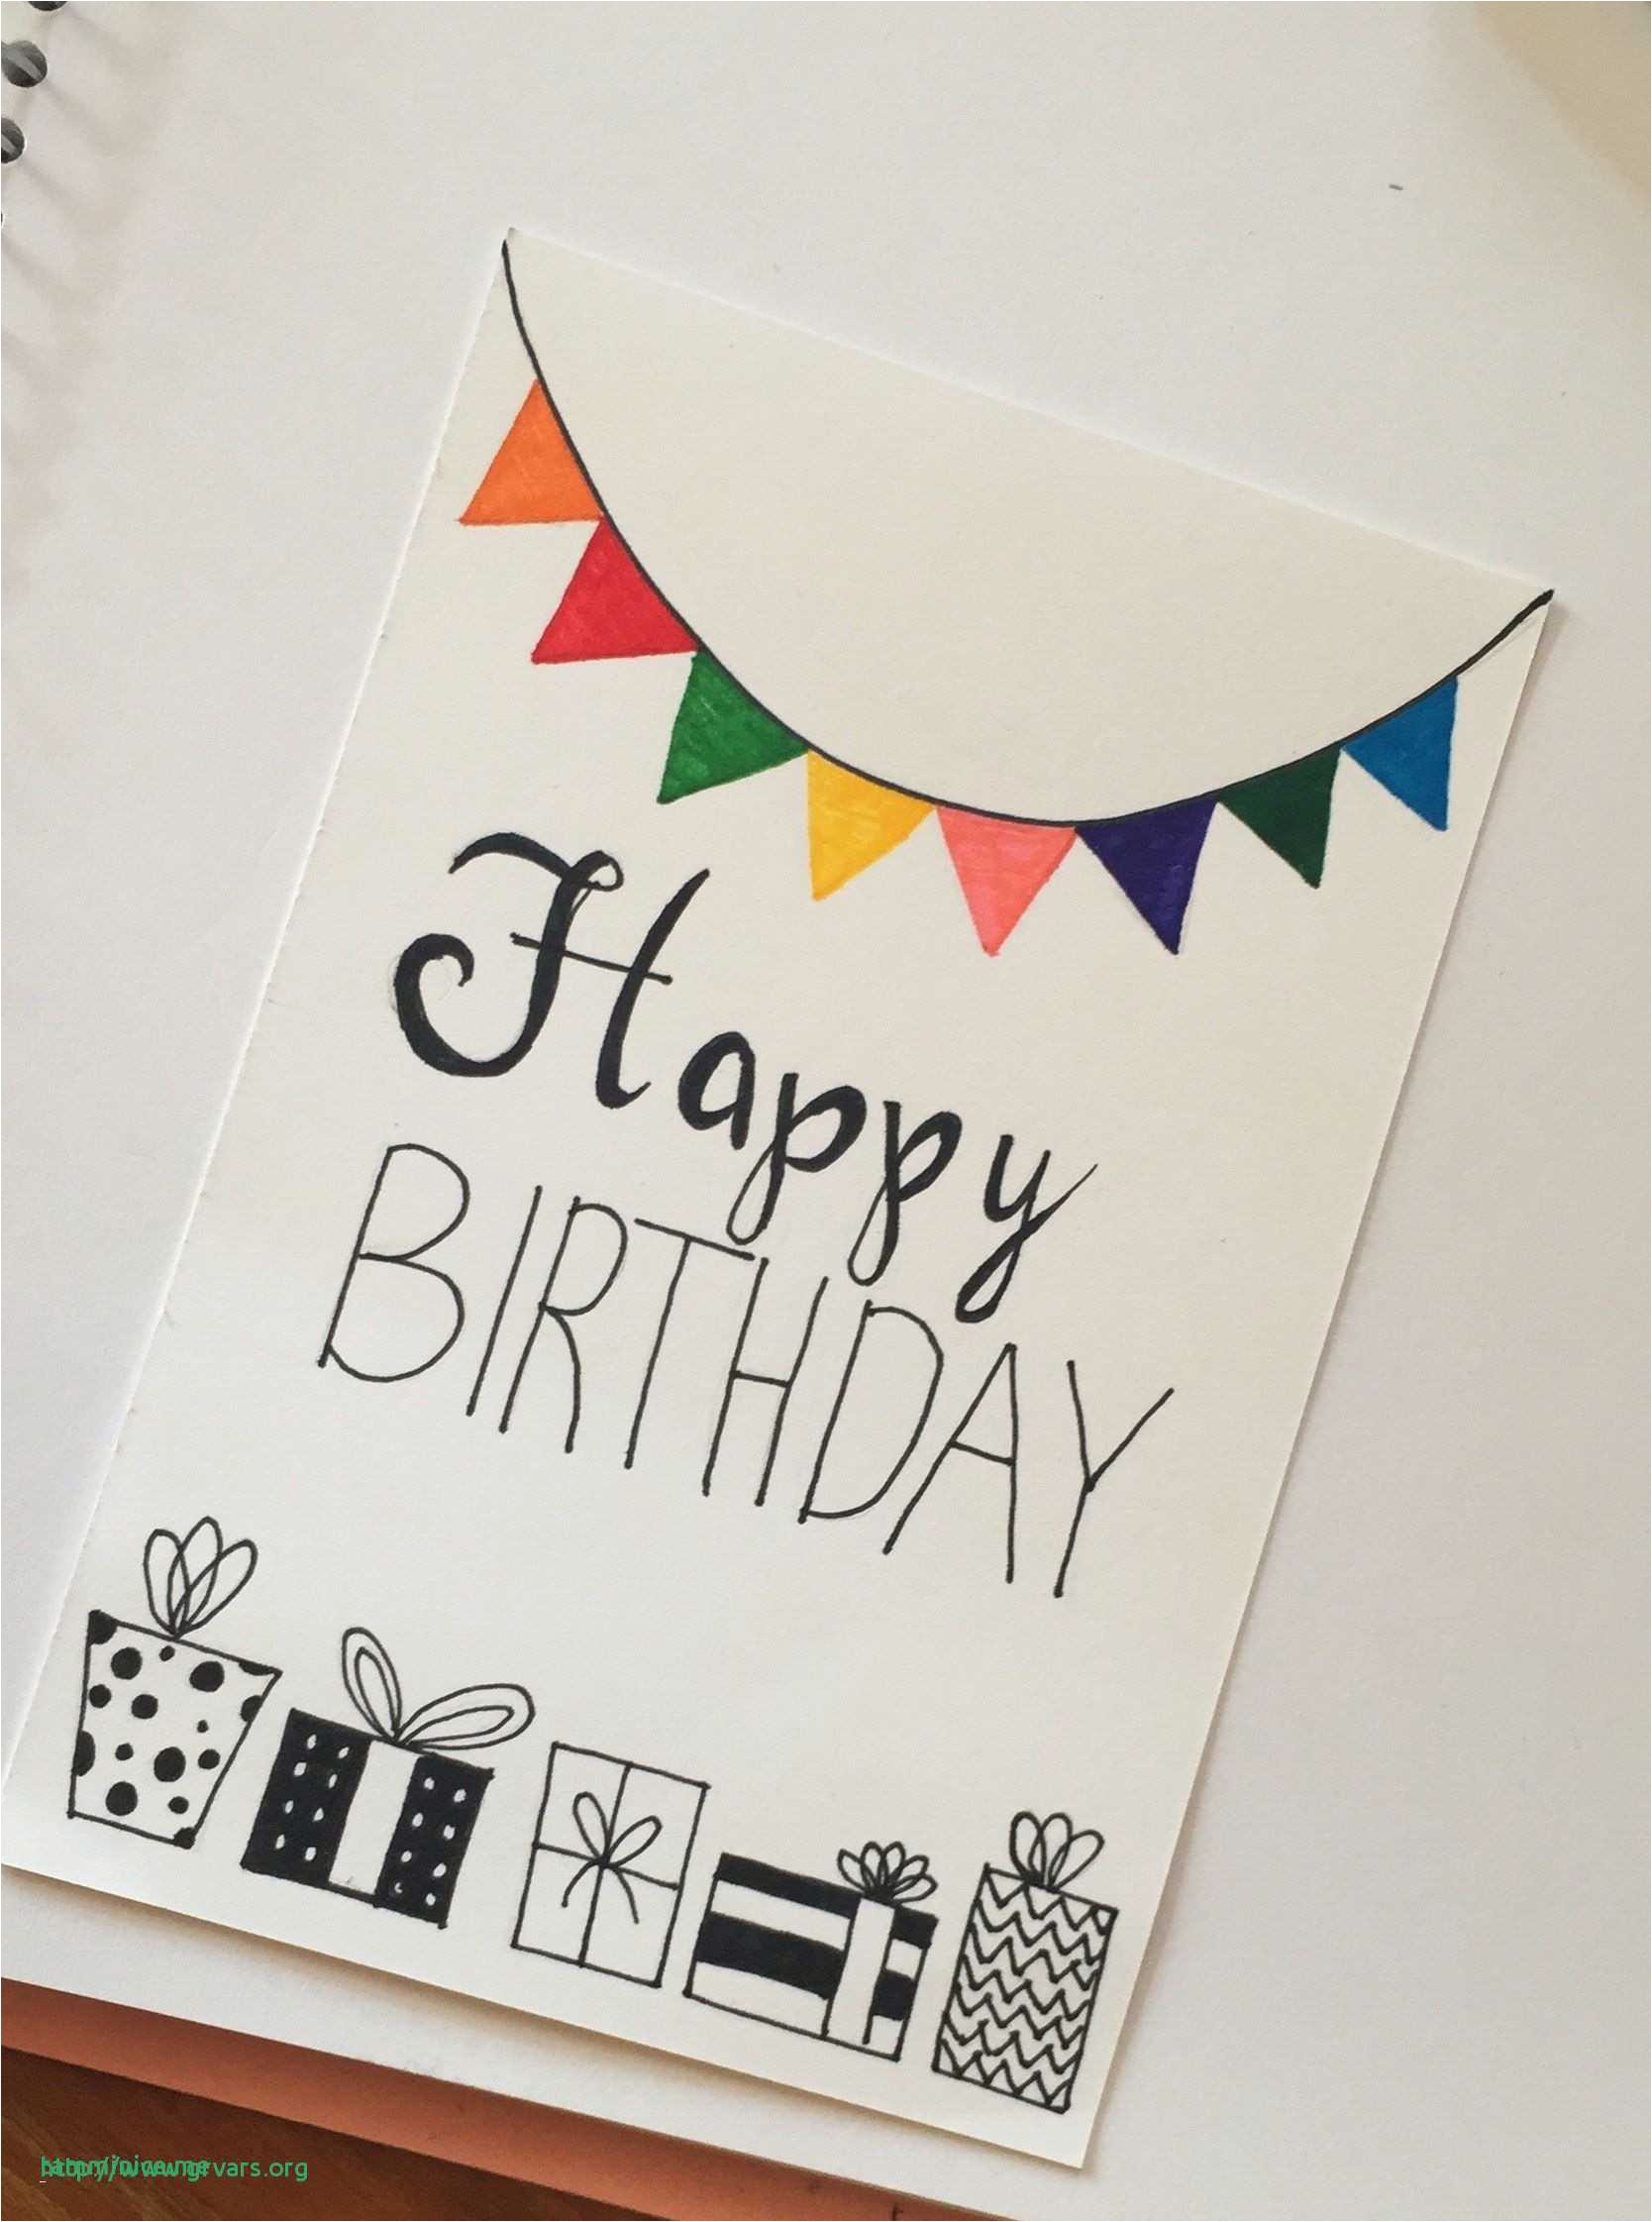 Good Ideas For A Birthday Card How To Make Diy Birthday Cards For Best Friend Simple Handmade